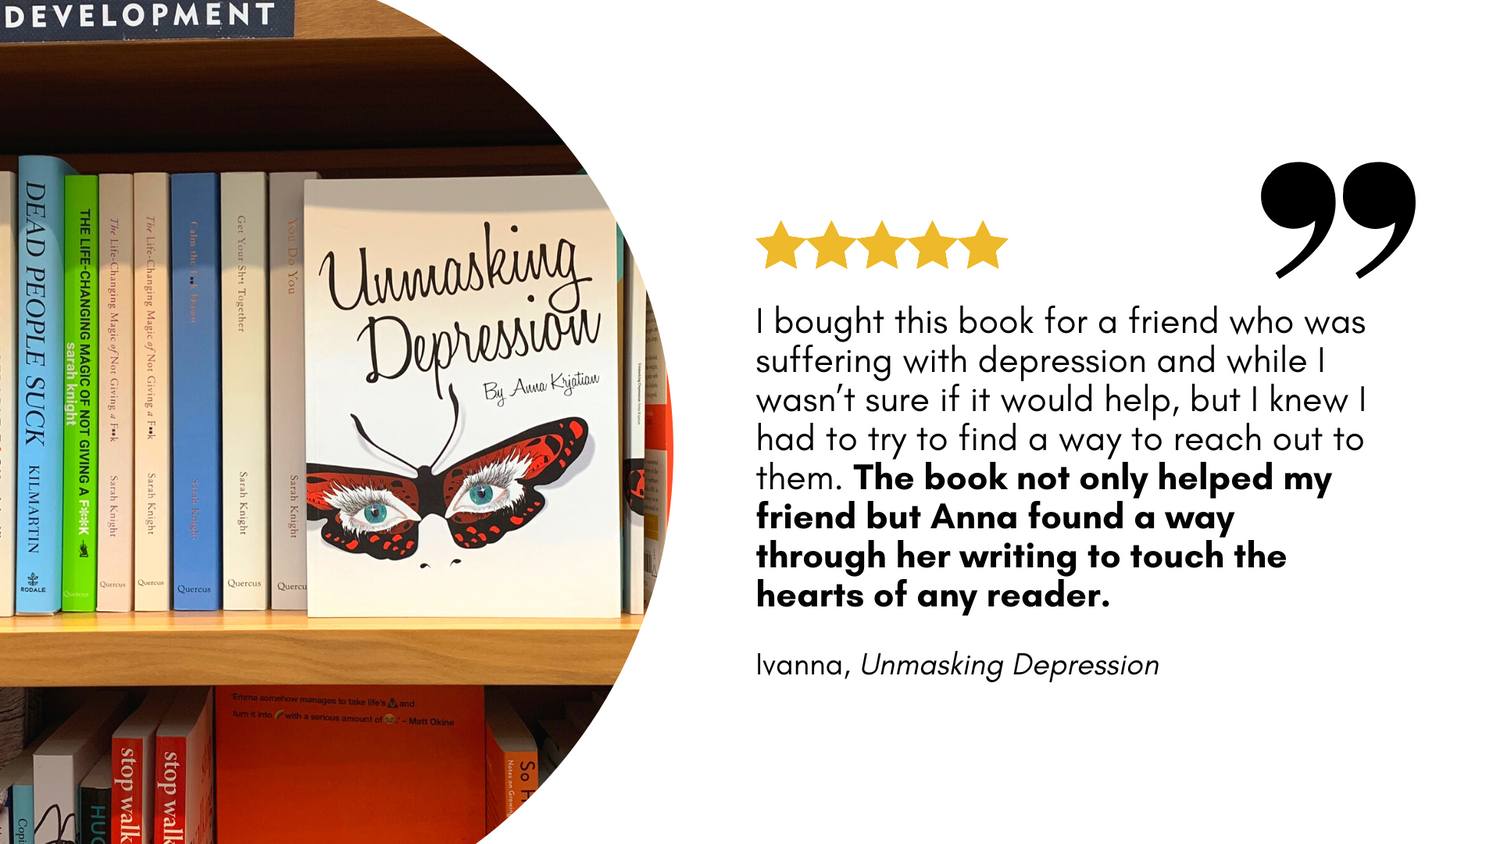 5 star book review from Ivanna for "Unmasking Depression" reads:I bought this book for a friend who was suffering with depression. The book not only helped my friend but Anna found a way through her writing to touch the hearts of any reader."